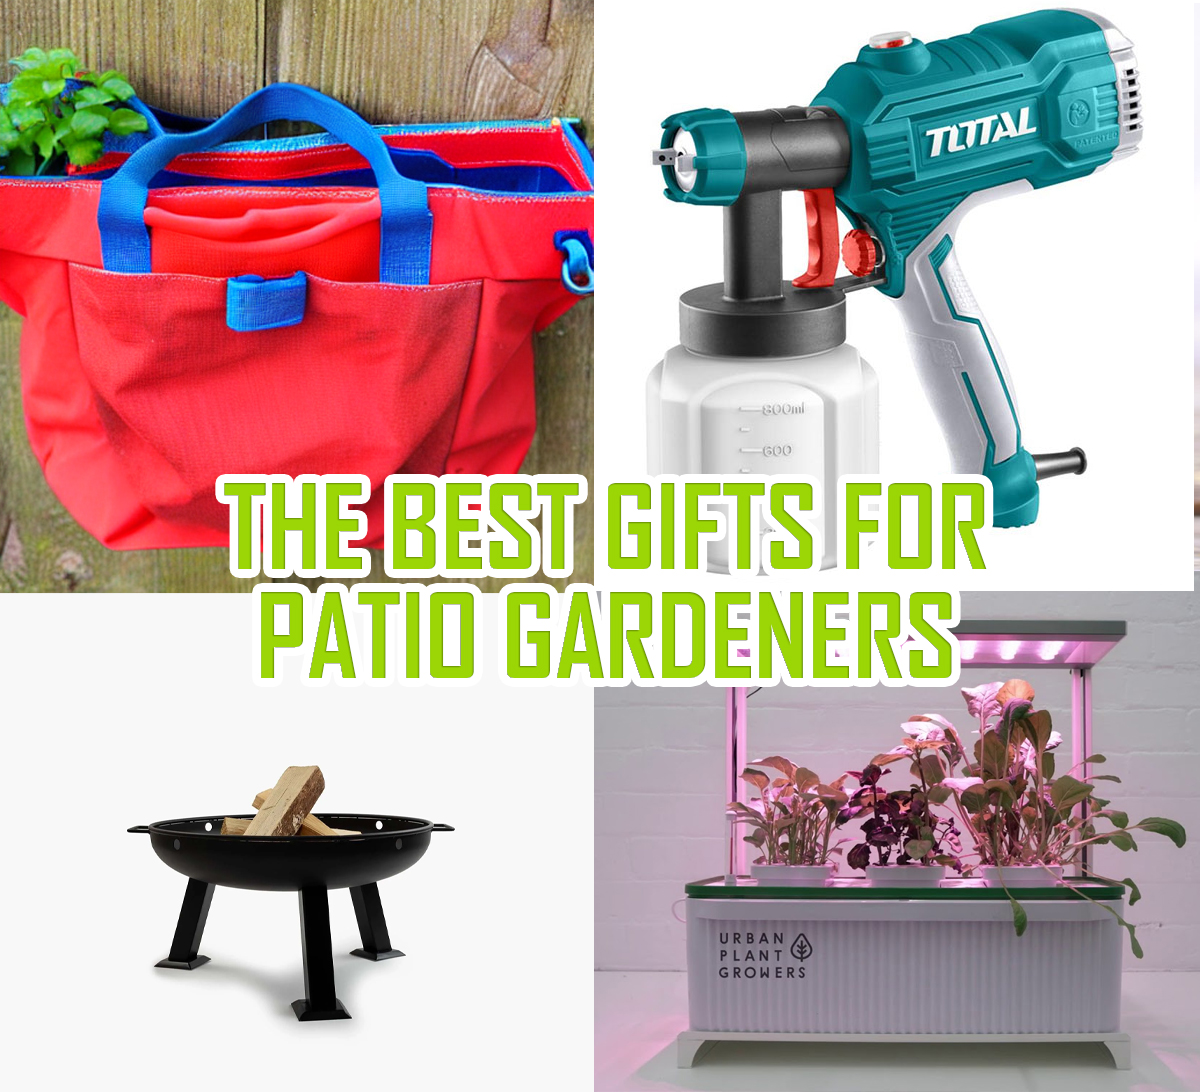 The Best Gifts for Patio Gardeners